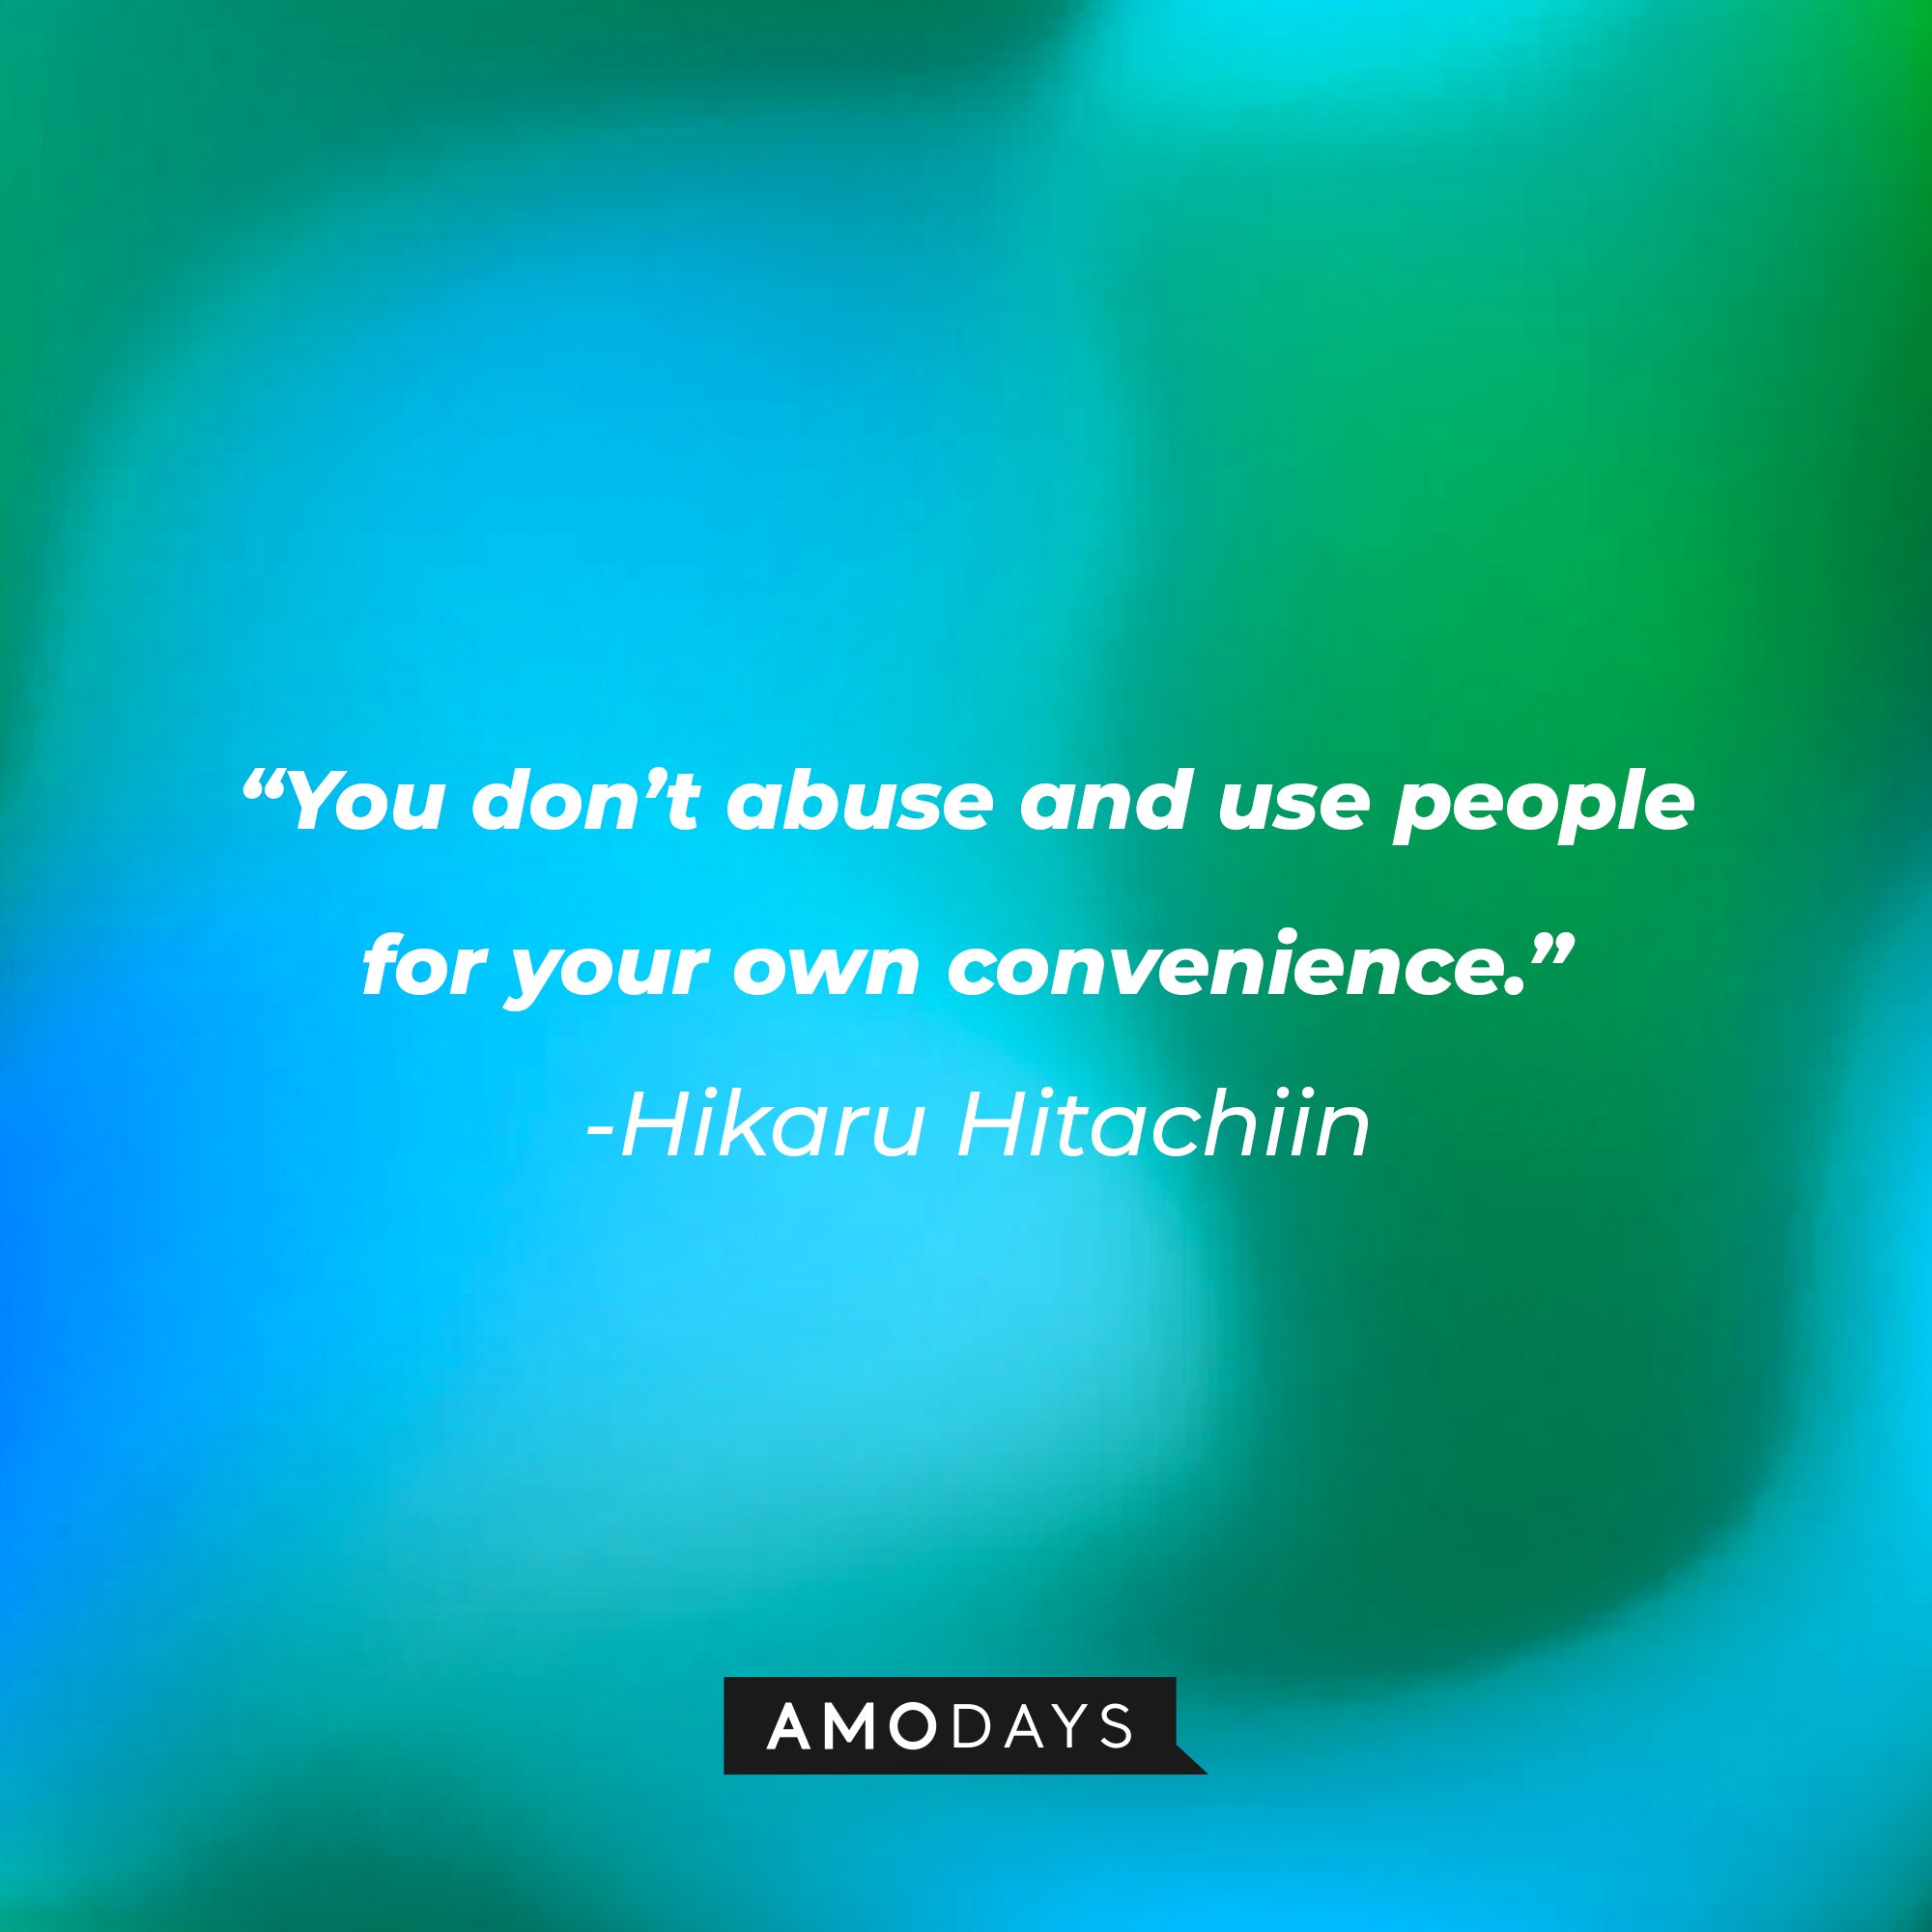 Hikaru Hitachiin’s quote: "You don’t abuse and use people for your own convenience."  | Image: AmoDays